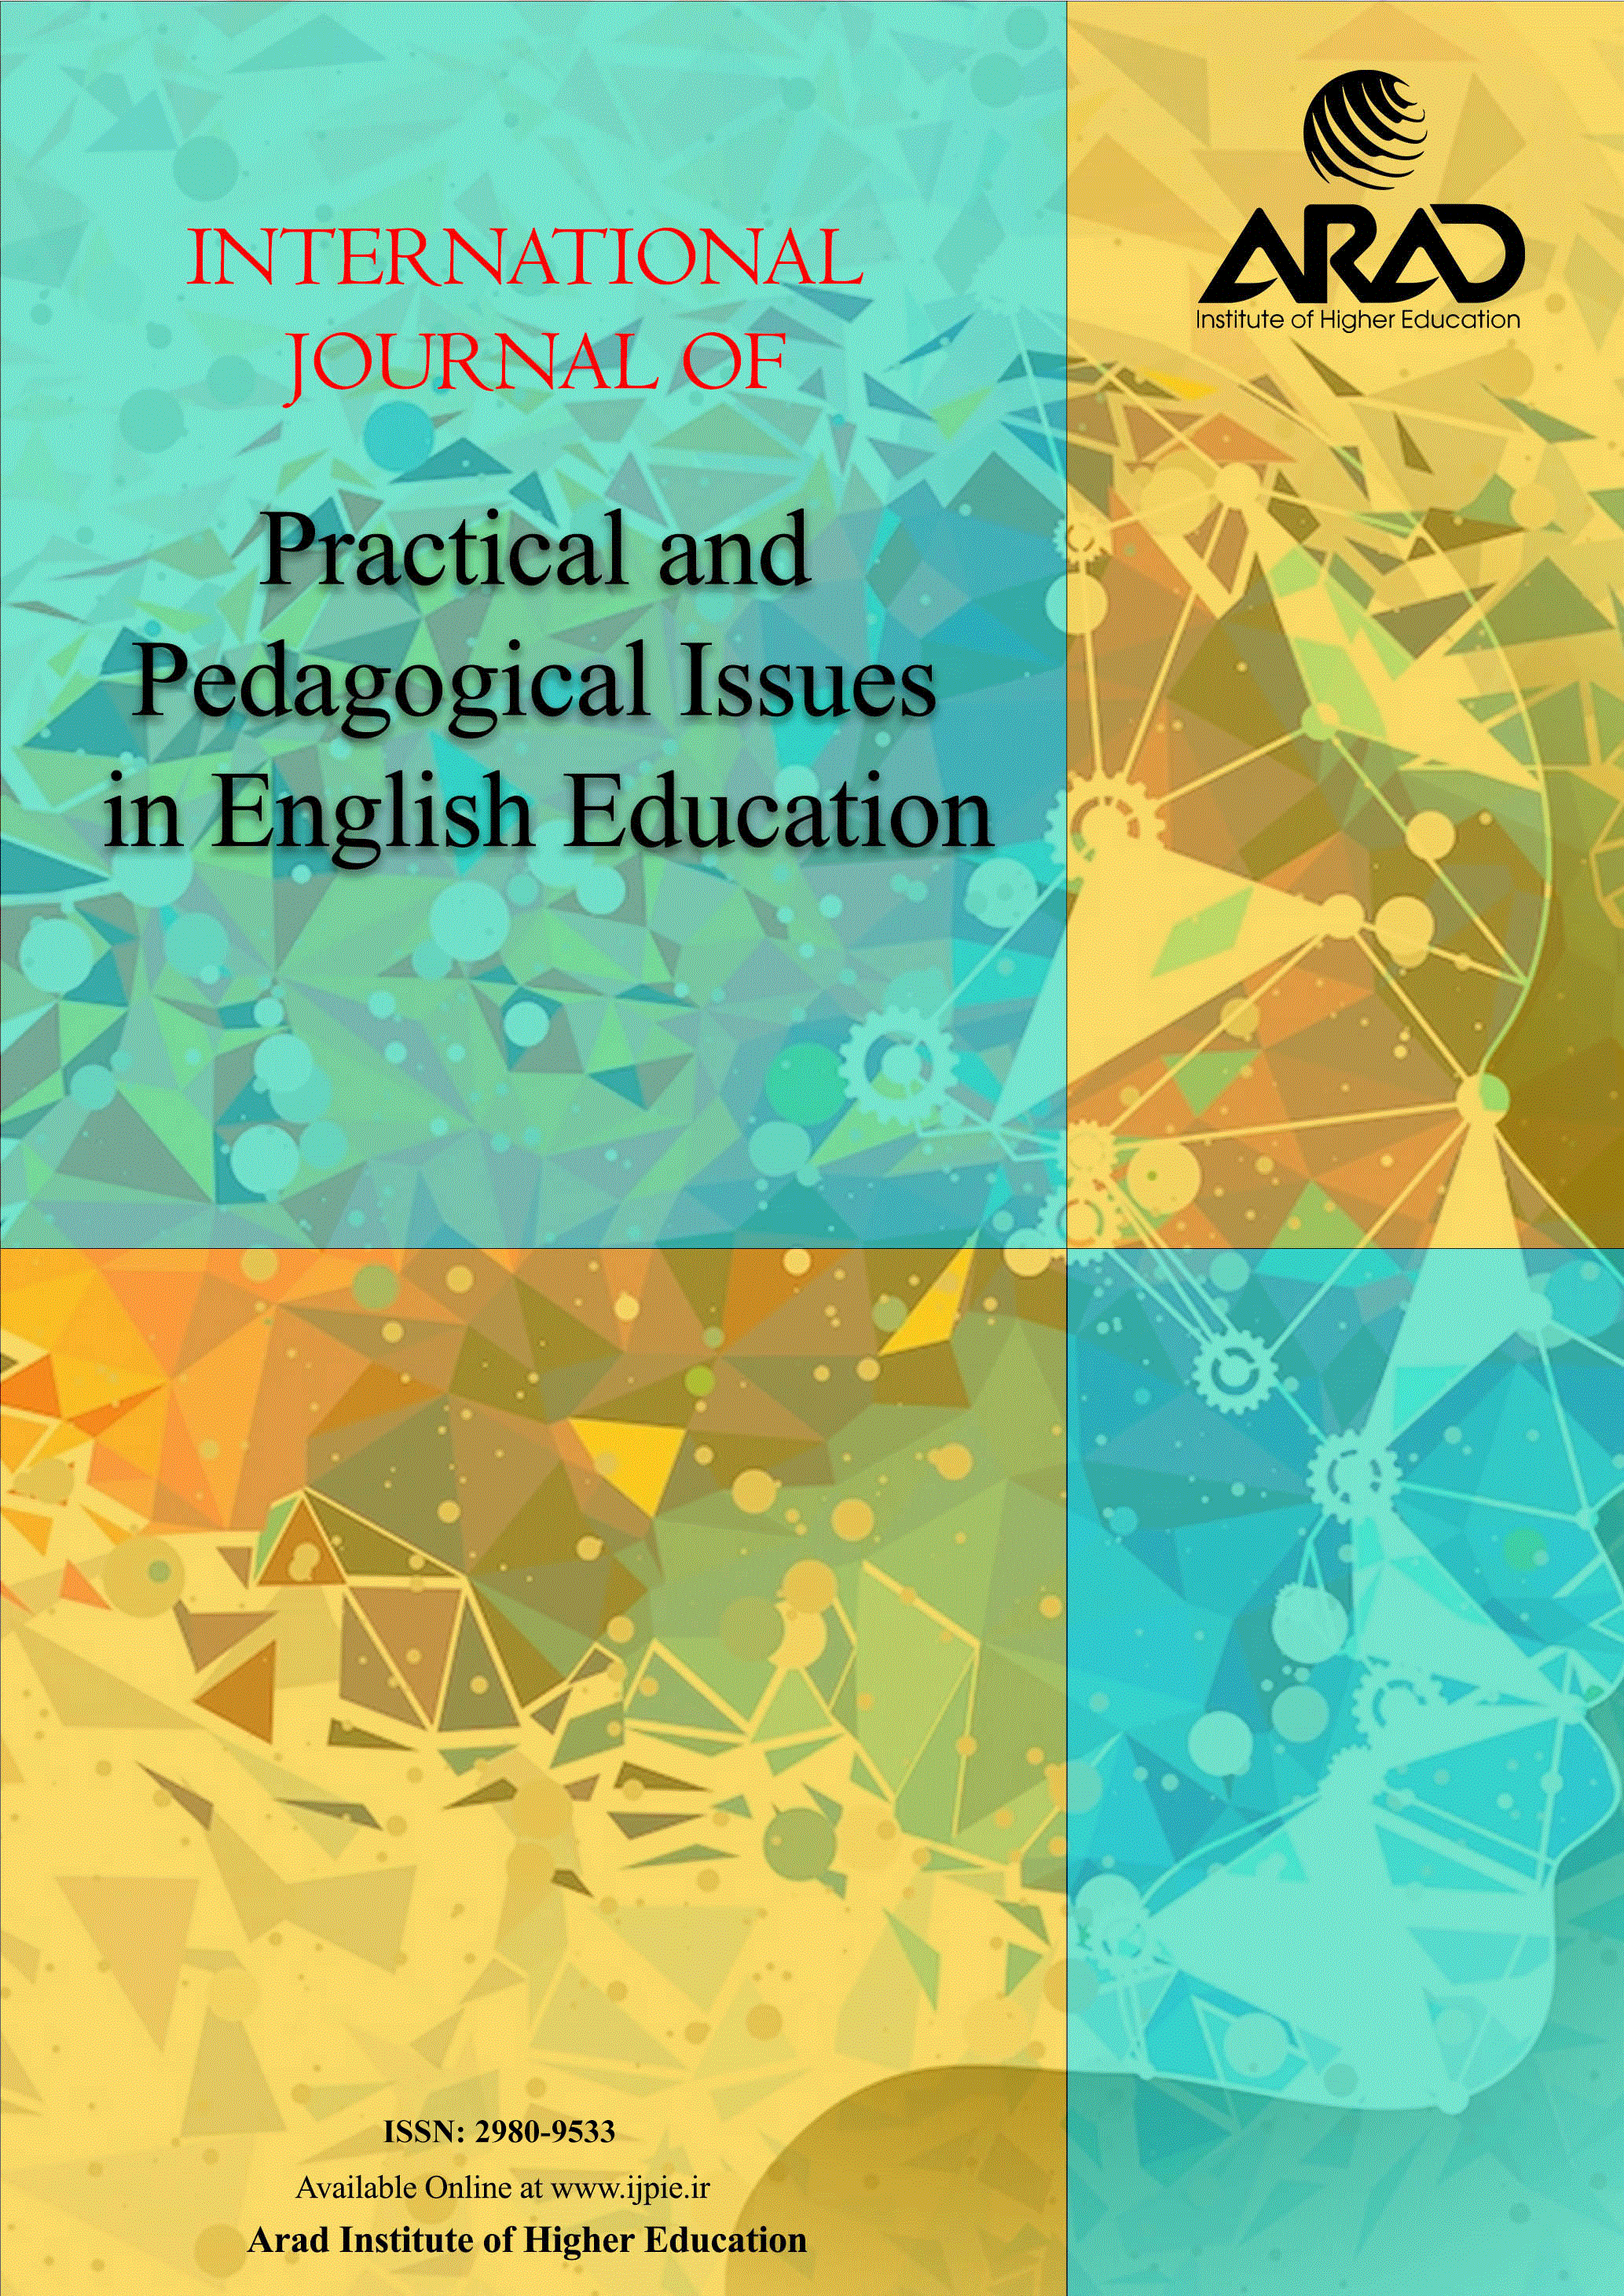 Practical and Pedagogical Issues in English Education